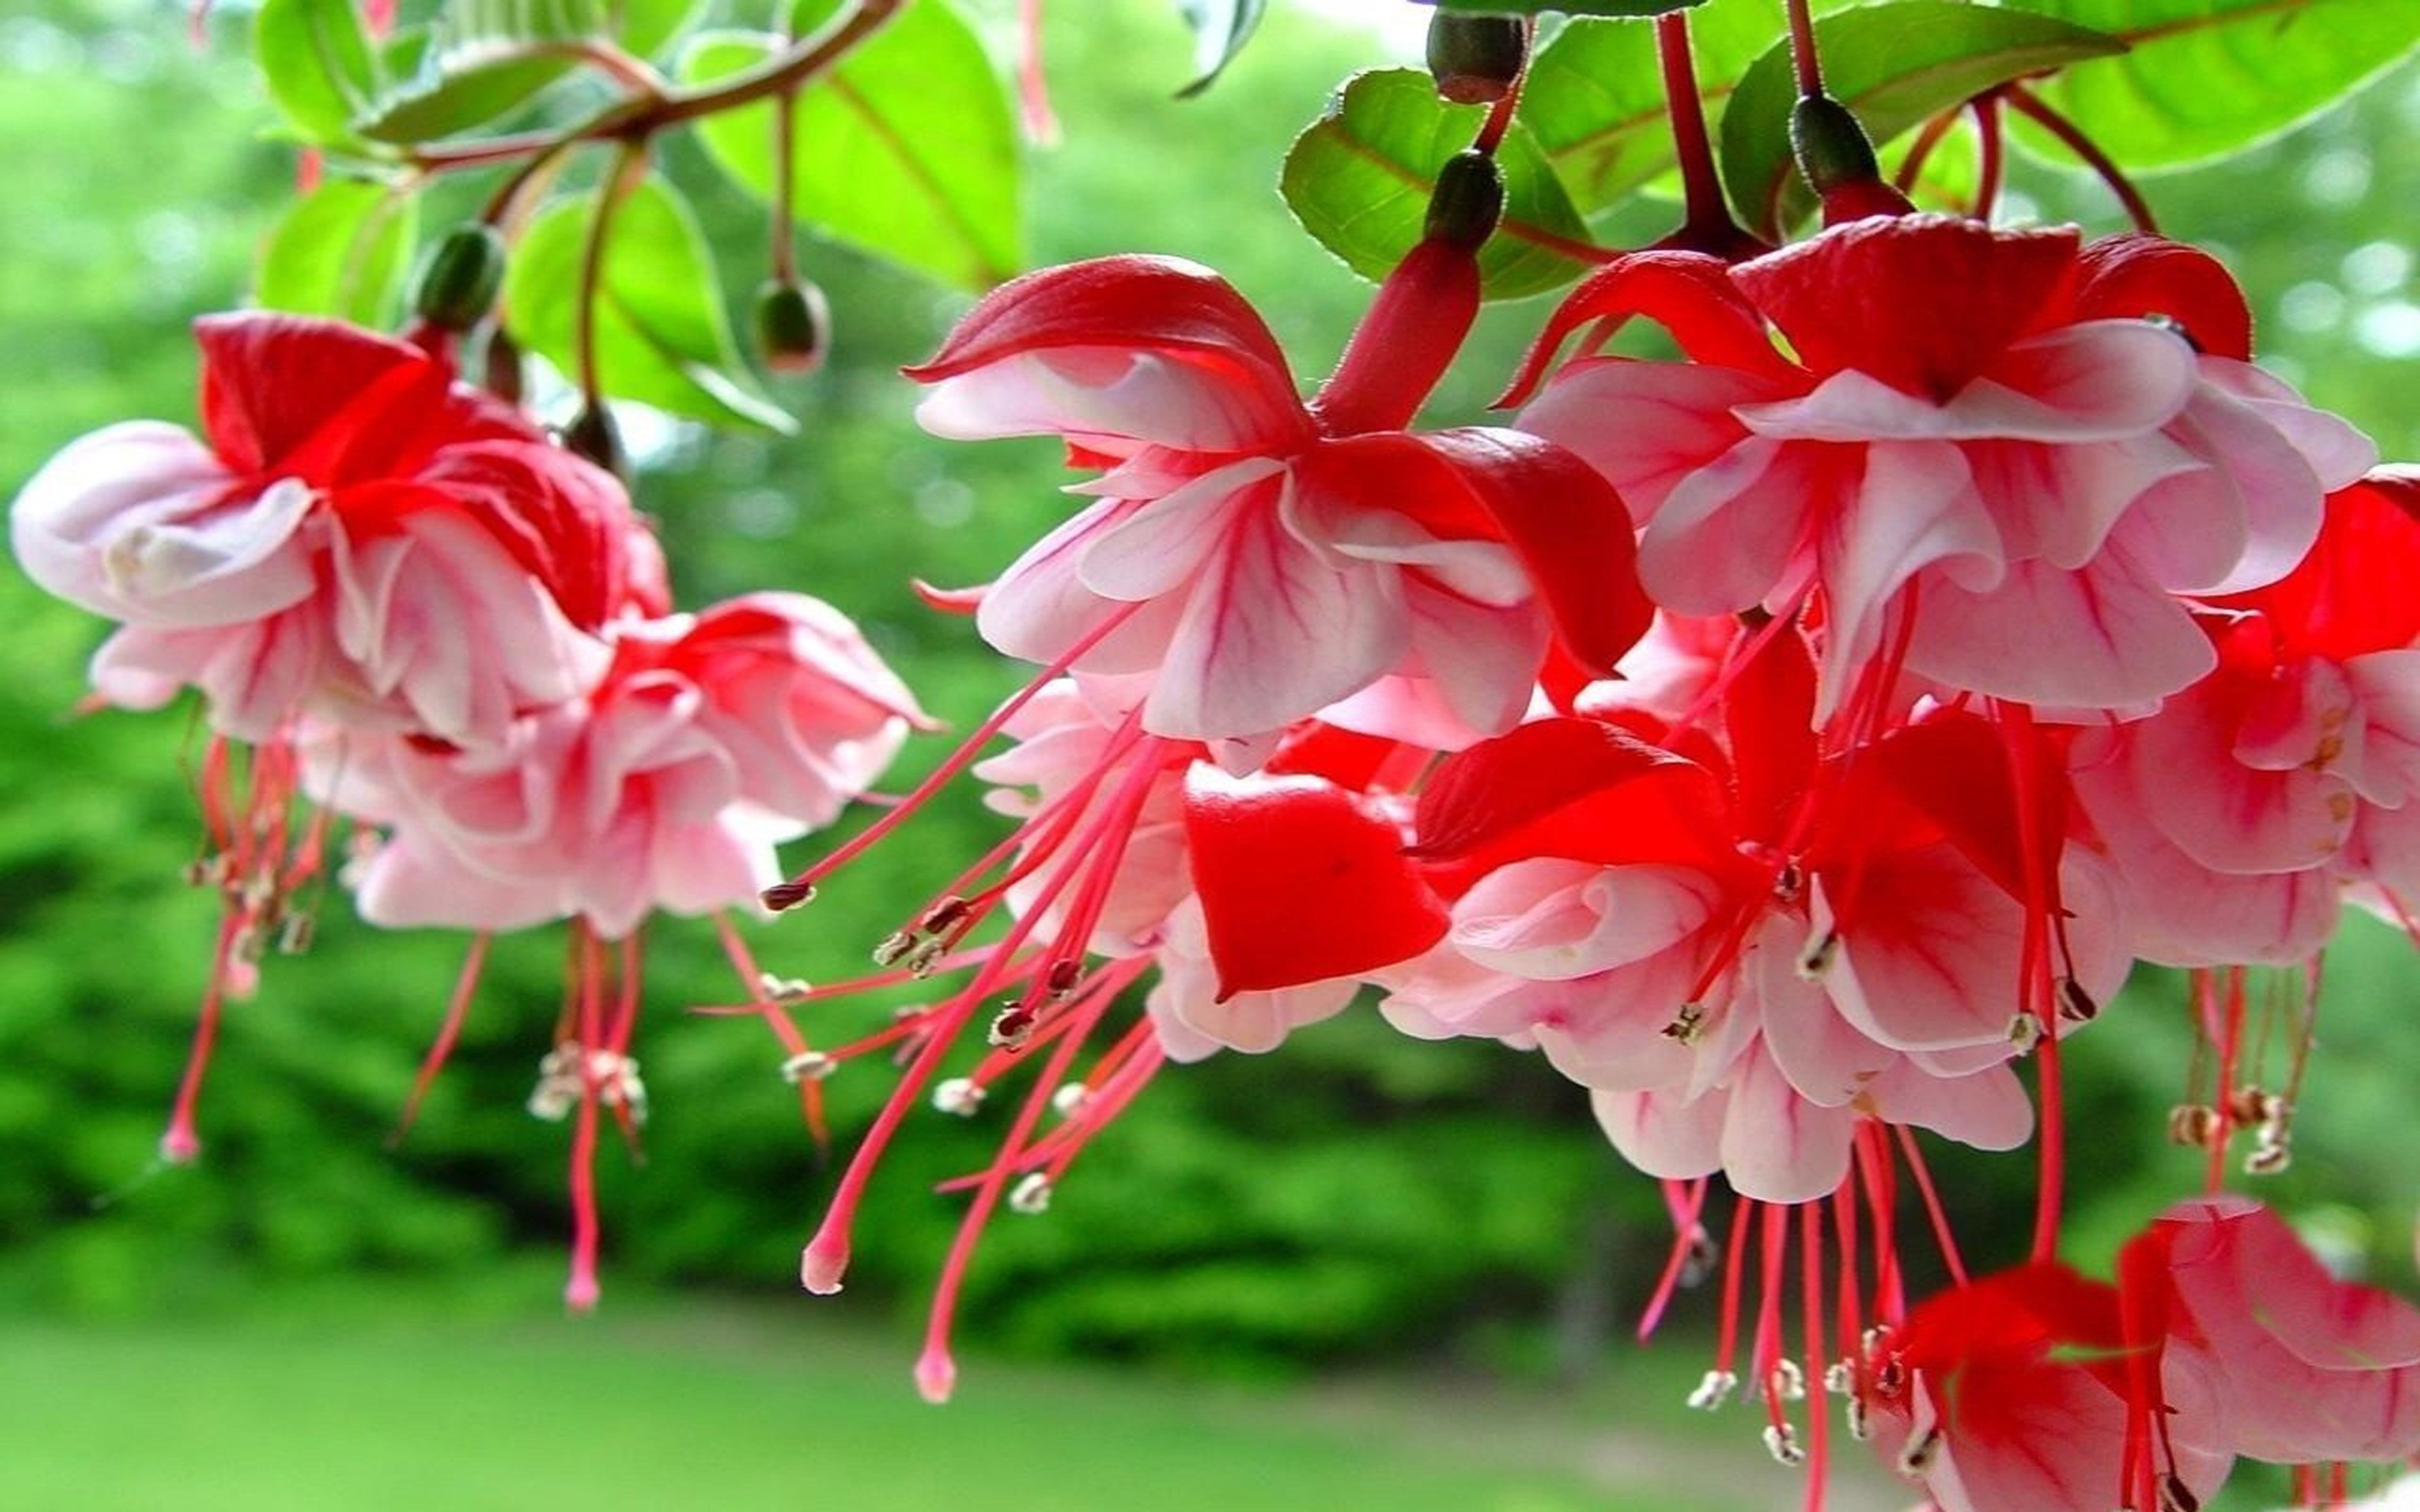 Fuchsia Spring Flowers With Red And Pink Color HD Wallpaper For Mobile Phones Tablet And Lapx2400, Wallpaper13.com